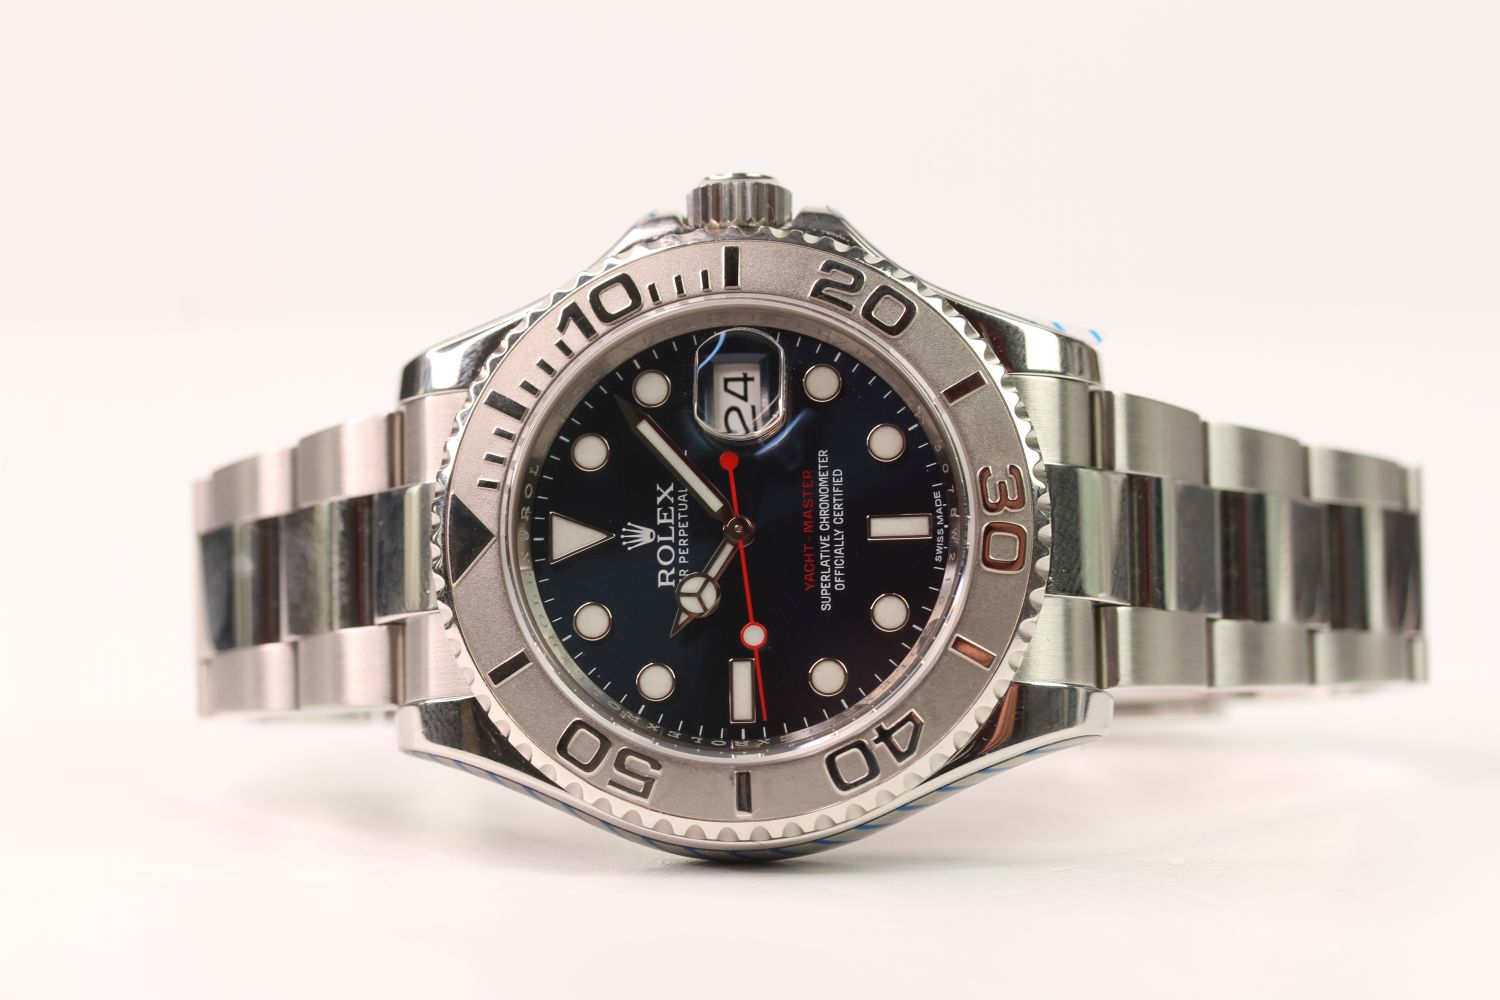 ROLEX YACHTMASTER 40 REFERENCE 116622 WITH BOX AND PAPERS 2013 AND RECENT ROLEX SERVICE, circular - Image 4 of 7